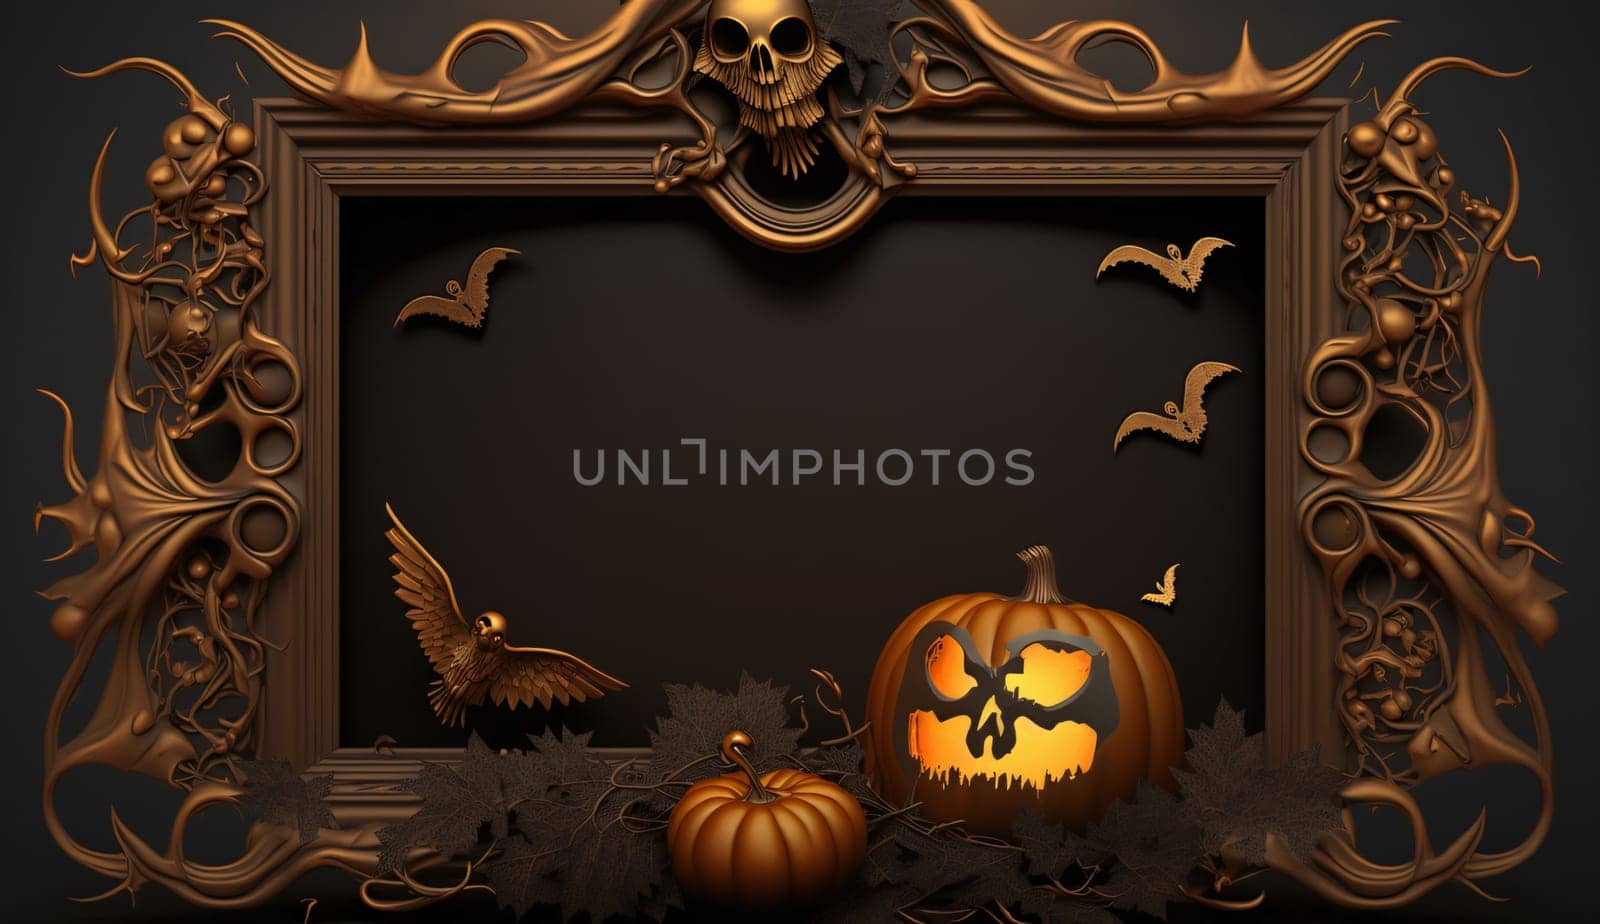 Decorated frame in the middle, space for your own content, board decorated with jack-o-lanterns. Graphic with space for your own content.